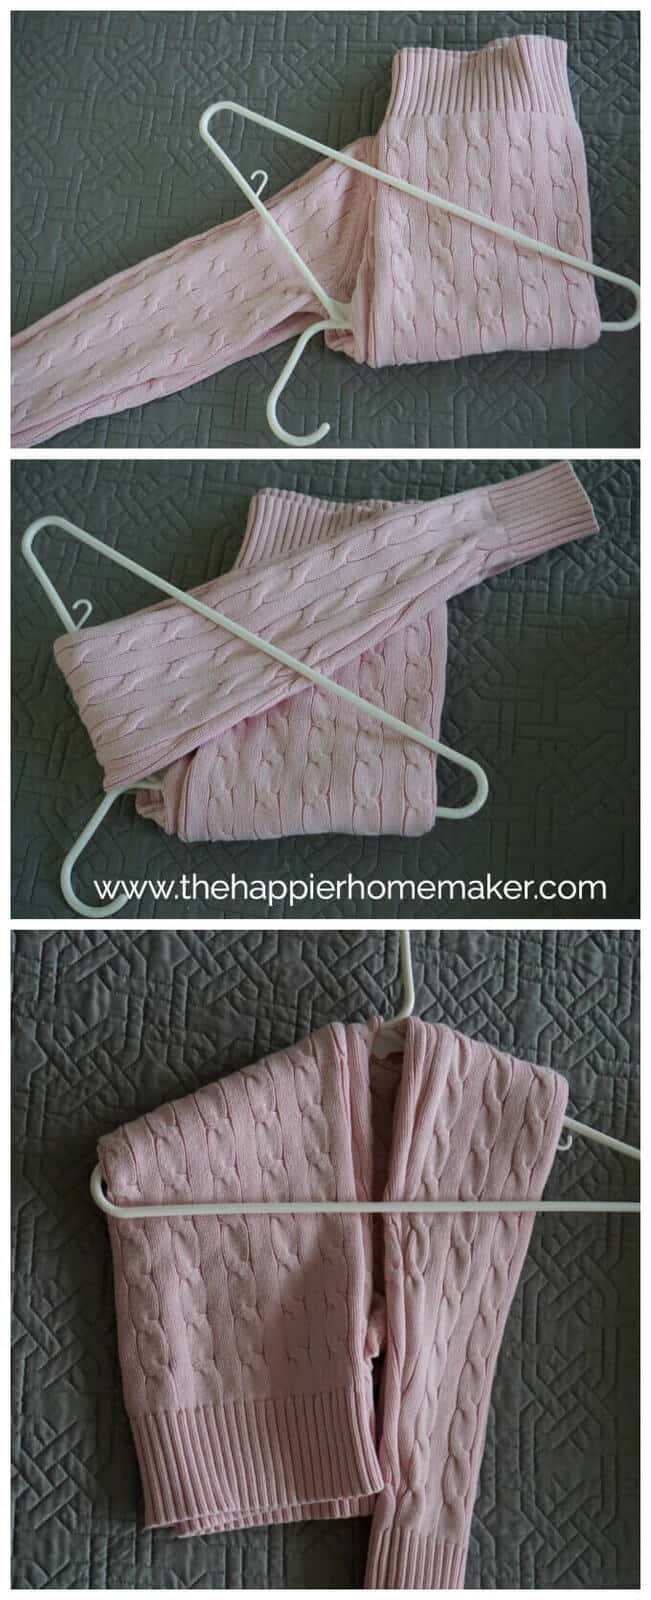 A collage of two picture showing how to fold a sweater in order to hang it on a hanger without stretching it out